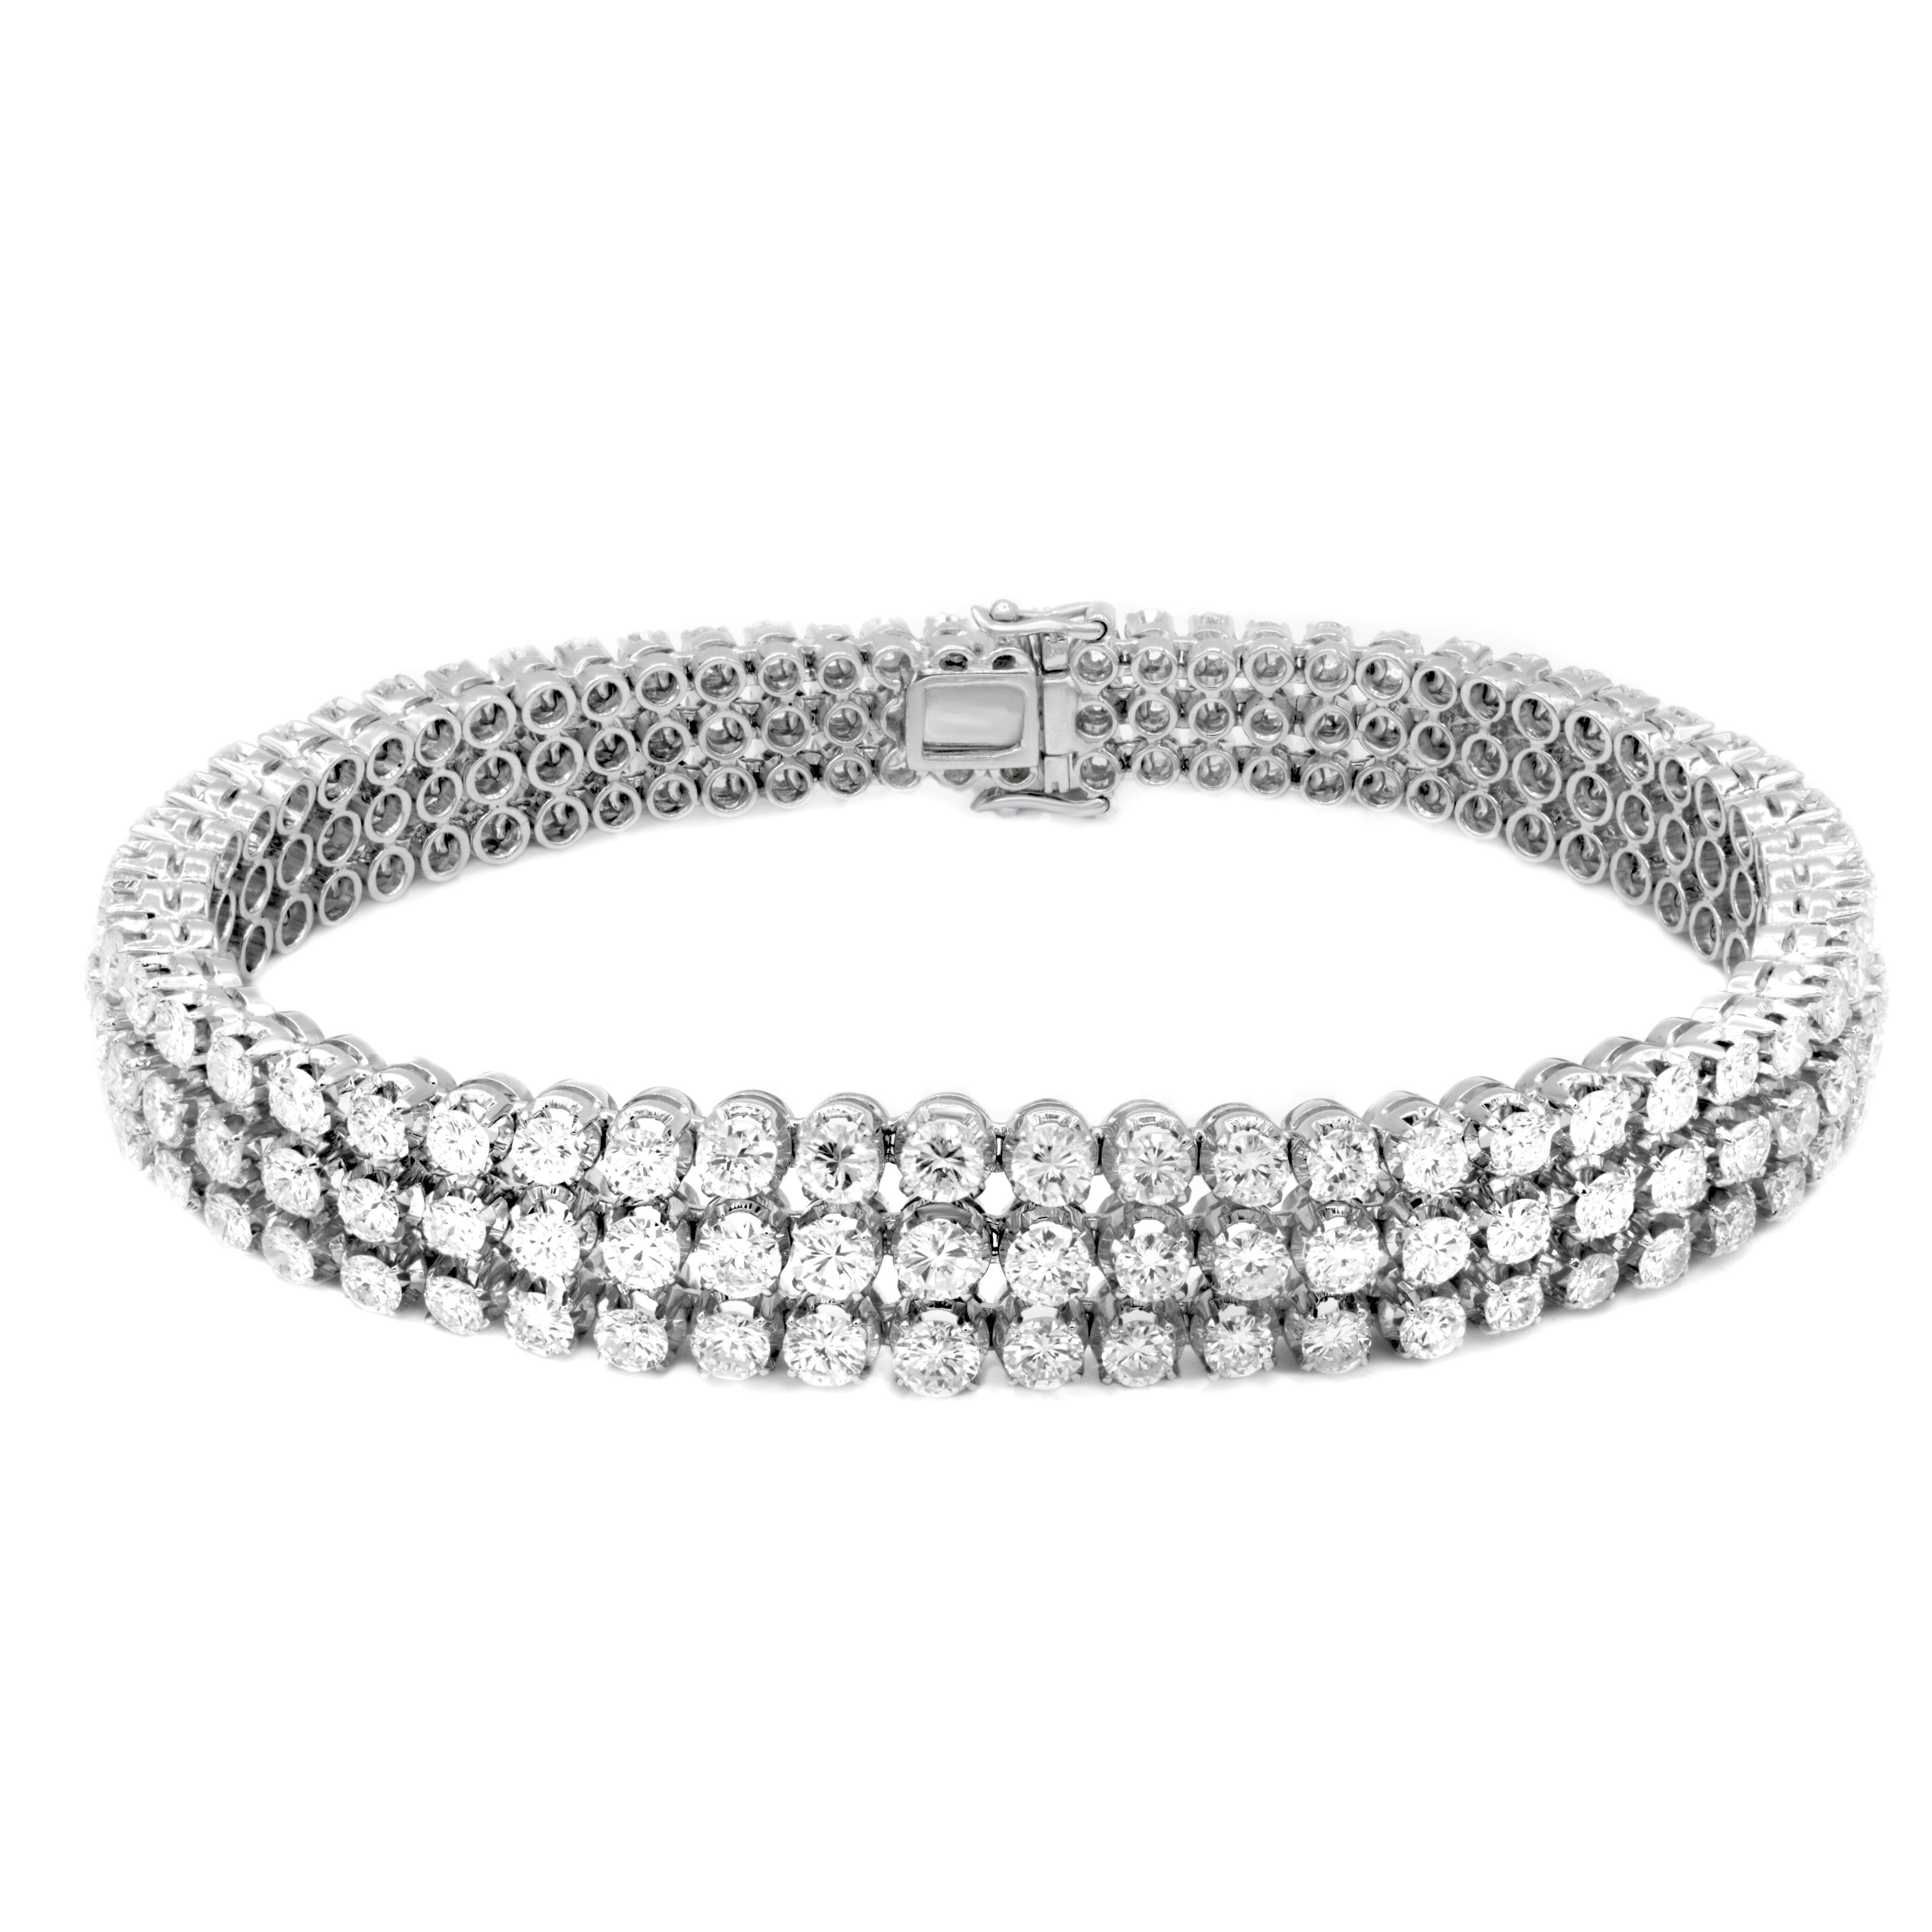 Brilliant Cut Diana M. 18kt white gold bracelet featuring 3 rows of 9.00 cts of Diamonds  For Sale